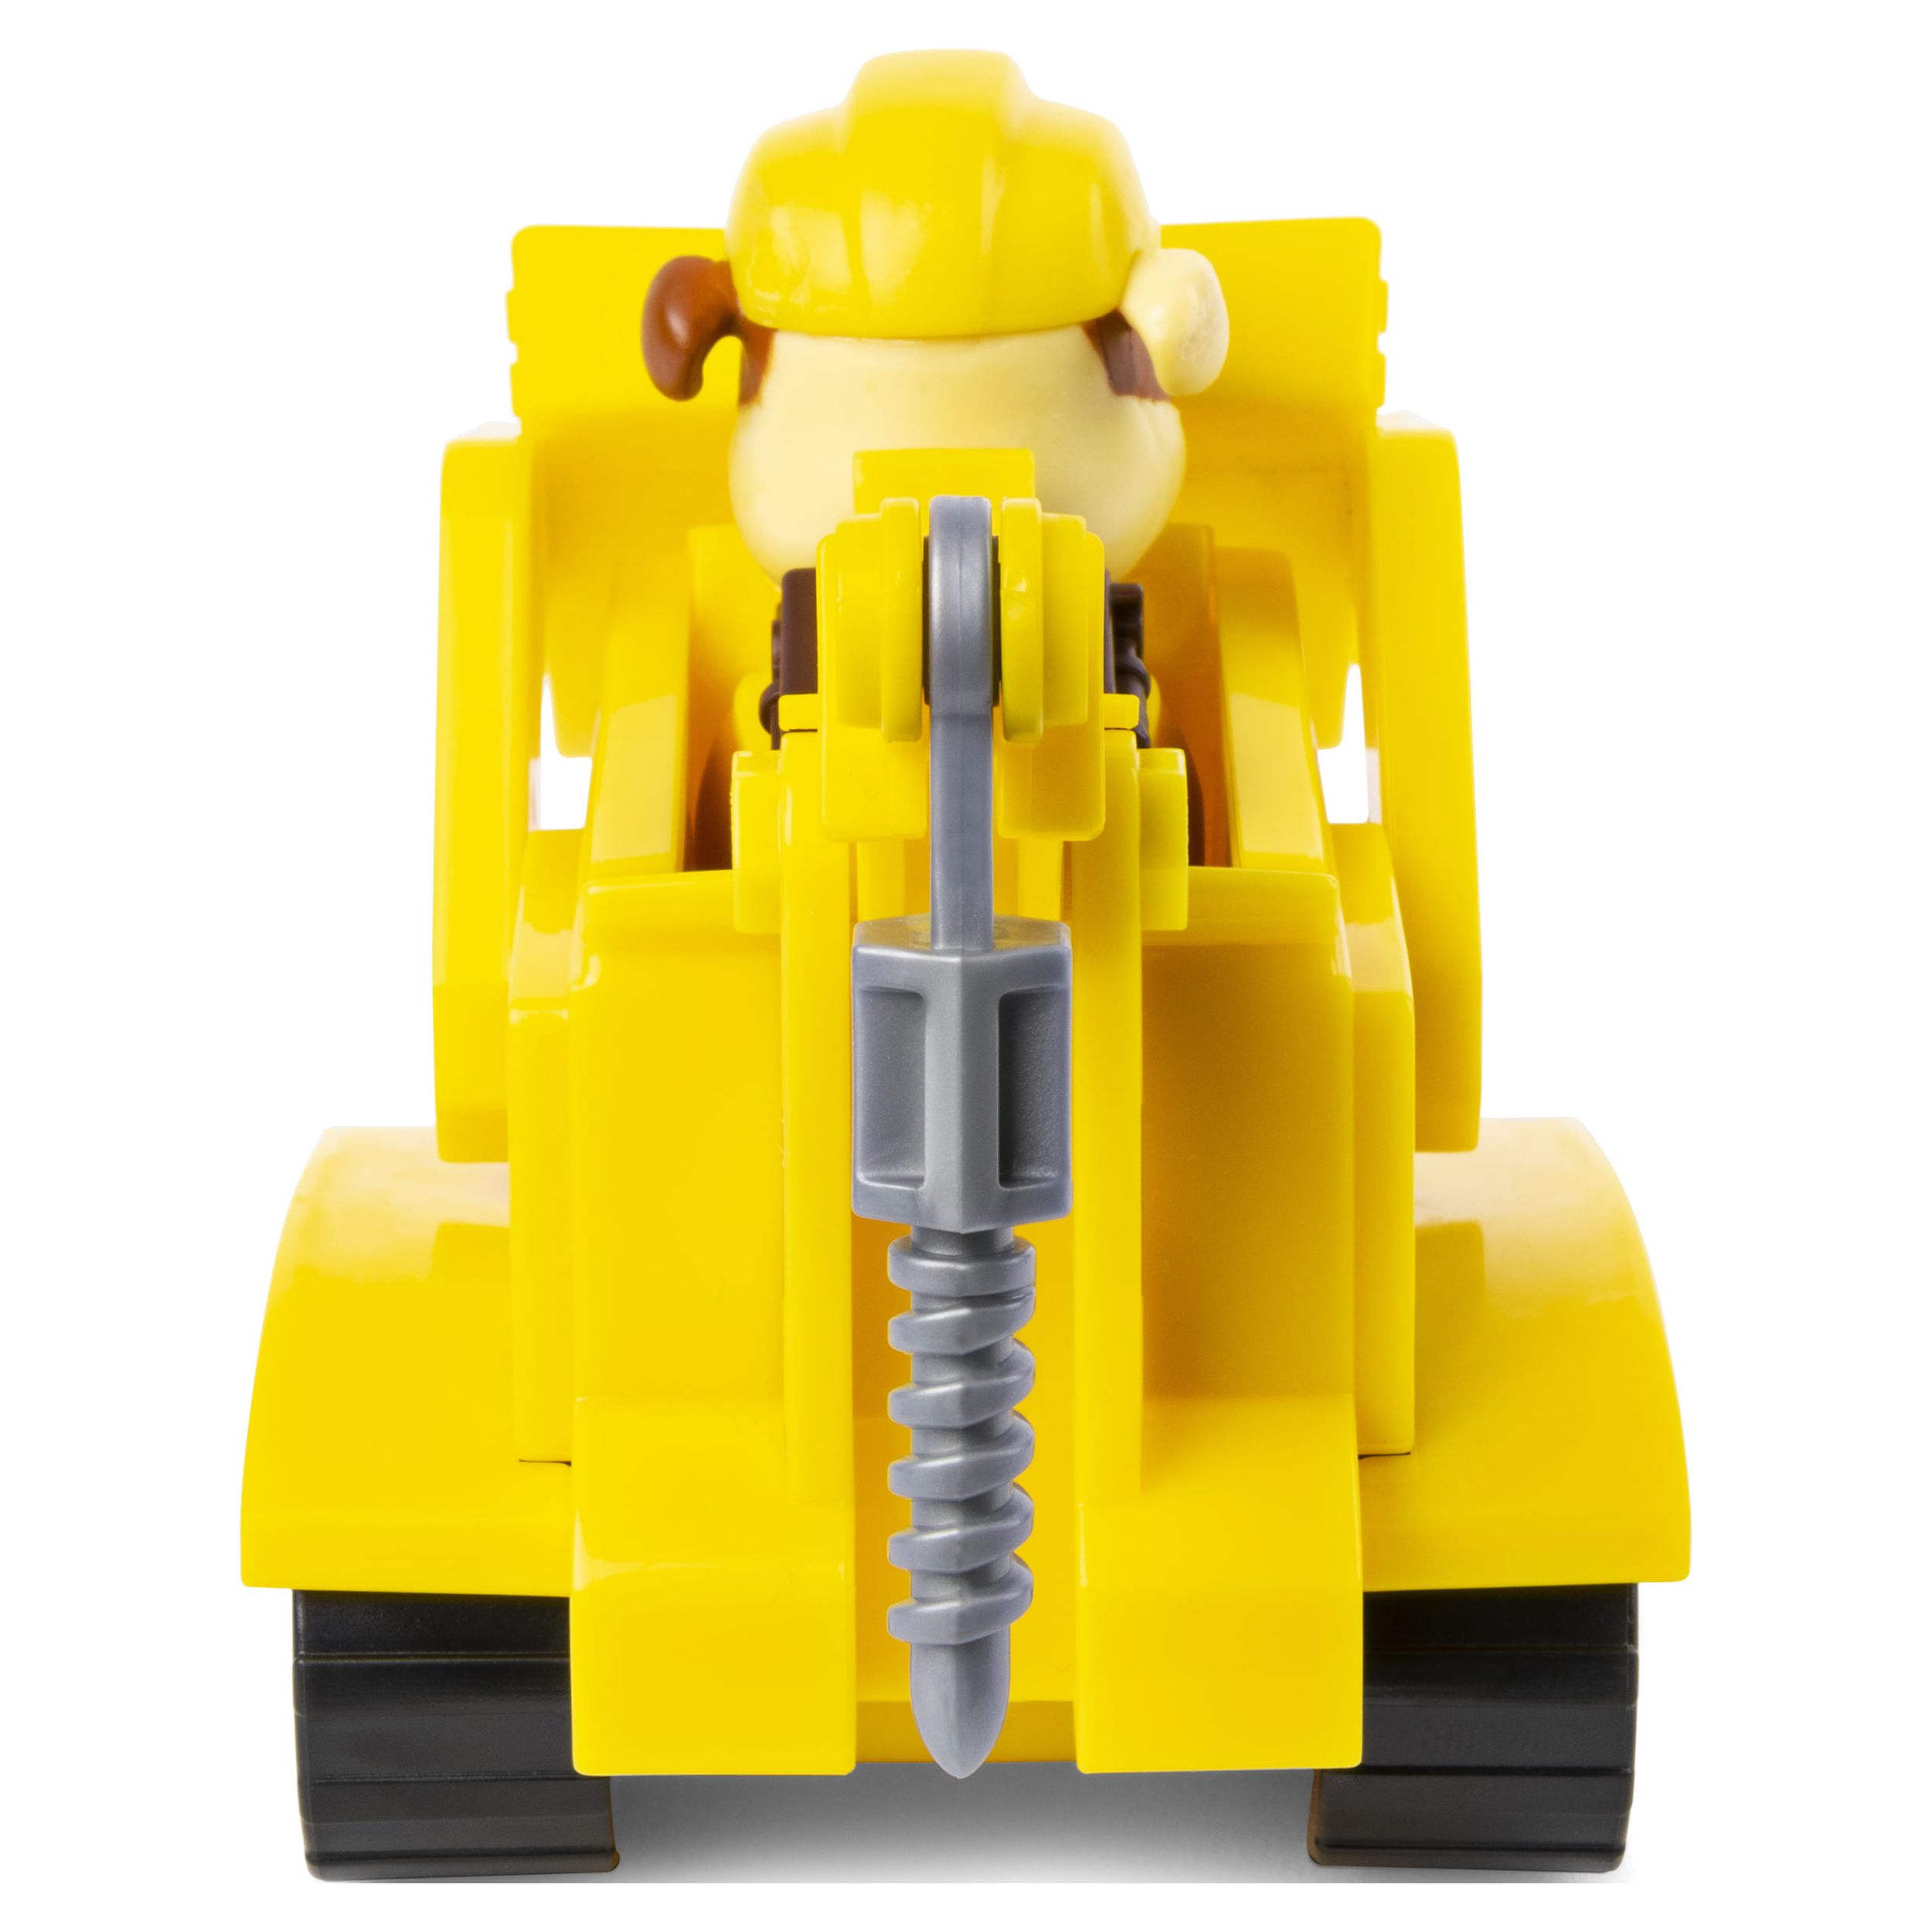 PAW Patrol, Rubble’s Bulldozer Vehicle with Collectible Figure, for Kids Aged 3 and Up - image 3 of 6